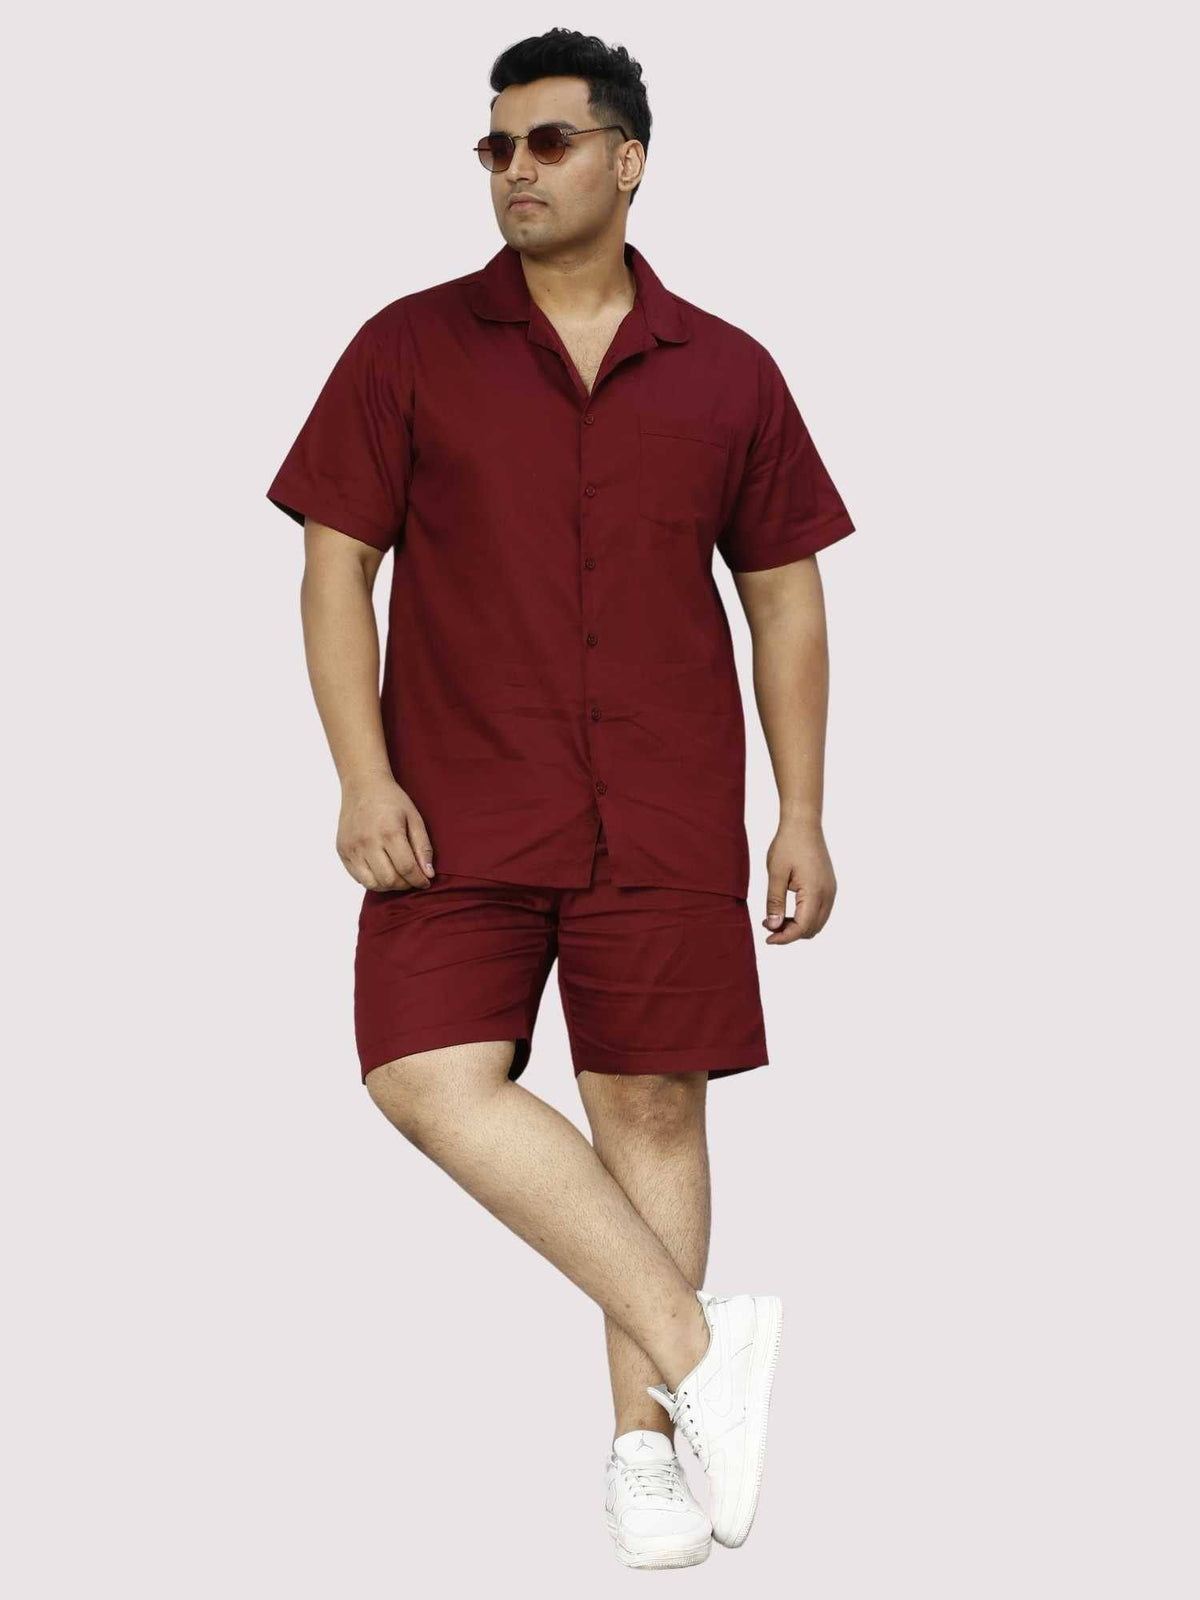 Rustic Solid Red Half Co-ords Set Men's Plus Size - Guniaa Fashions